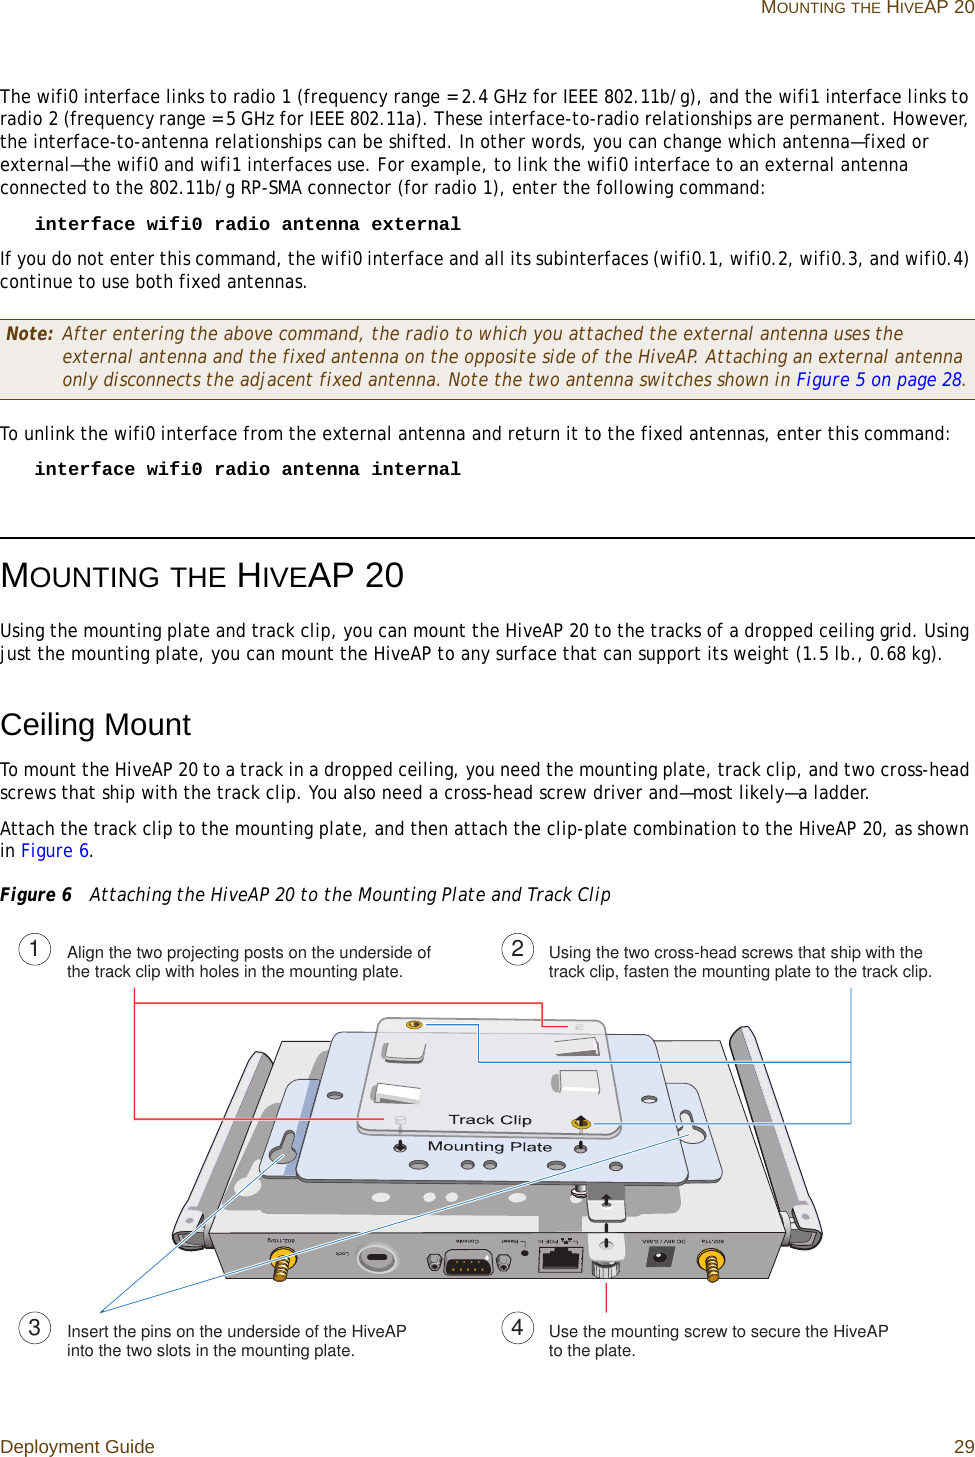 Deployment Guide 29 MOUNTING THE HIVEAP 20The wifi0 interface links to radio 1 (frequency range = 2.4 GHz for IEEE 802.11b/g), and the wifi1 interface links to radio 2 (frequency range = 5 GHz for IEEE 802.11a). These interface-to-radio relationships are permanent. However, the interface-to-antenna relationships can be shifted. In other words, you can change which antenna—fixed or external—the wifi0 and wifi1 interfaces use. For example, to link the wifi0 interface to an external antenna connected to the 802.11b/g RP-SMA connector (for radio 1), enter the following command:interface wifi0 radio antenna external If you do not enter this command, the wifi0 interface and all its subinterfaces (wifi0.1, wifi0.2, wifi0.3, and wifi0.4) continue to use both fixed antennas.To unlink the wifi0 interface from the external antenna and return it to the fixed antennas, enter this command:interface wifi0 radio antenna internalMOUNTING THE HIVEAP 20Using the mounting plate and track clip, you can mount the HiveAP 20 to the tracks of a dropped ceiling grid. Using just the mounting plate, you can mount the HiveAP to any surface that can support its weight (1.5 lb., 0.68 kg).Ceiling MountTo mount the HiveAP 20 to a track in a dropped ceiling, you need the mounting plate, track clip, and two cross-head screws that ship with the track clip. You also need a cross-head screw driver and—most likely—a ladder.Attach the track clip to the mounting plate, and then attach the clip-plate combination to the HiveAP 20, as shown in Figure 6.Figure 6  Attaching the HiveAP 20 to the Mounting Plate and Track ClipNote: After entering the above command, the radio to which you attached the external antenna uses the external antenna and the fixed antenna on the opposite side of the HiveAP. Attaching an external antenna only disconnects the adjacent fixed antenna. Note the two antenna switches shown in Figure 5 on page 28.Align the two projecting posts on the underside of the track clip with holes in the mounting plate. Using the two cross-head screws that ship with the track clip, fasten the mounting plate to the track clip.Insert the pins on the underside of the HiveAP into the two slots in the mounting plate. Use the mounting screw to secure the HiveAP to the plate.1234